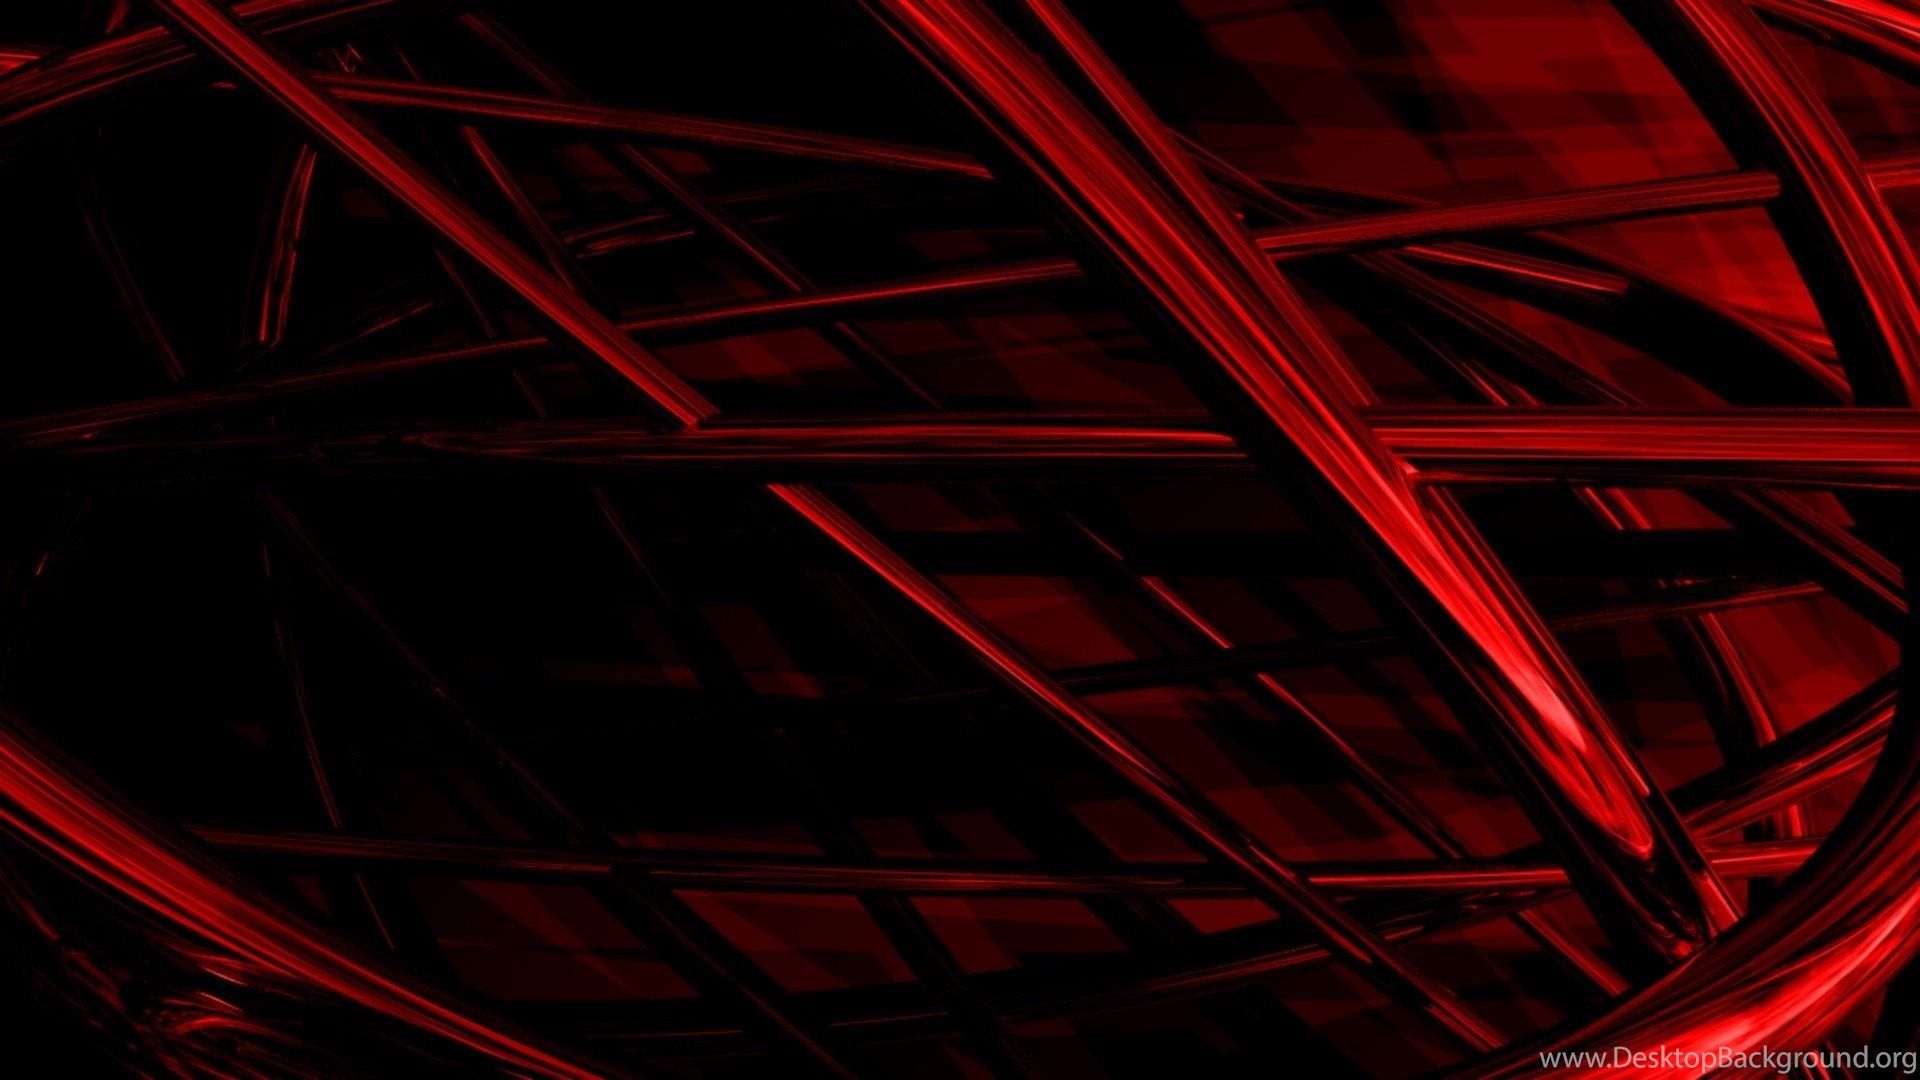 Full HD Wallpaper Duct Red Dark Background, Desktop Background HD. Desktop Background